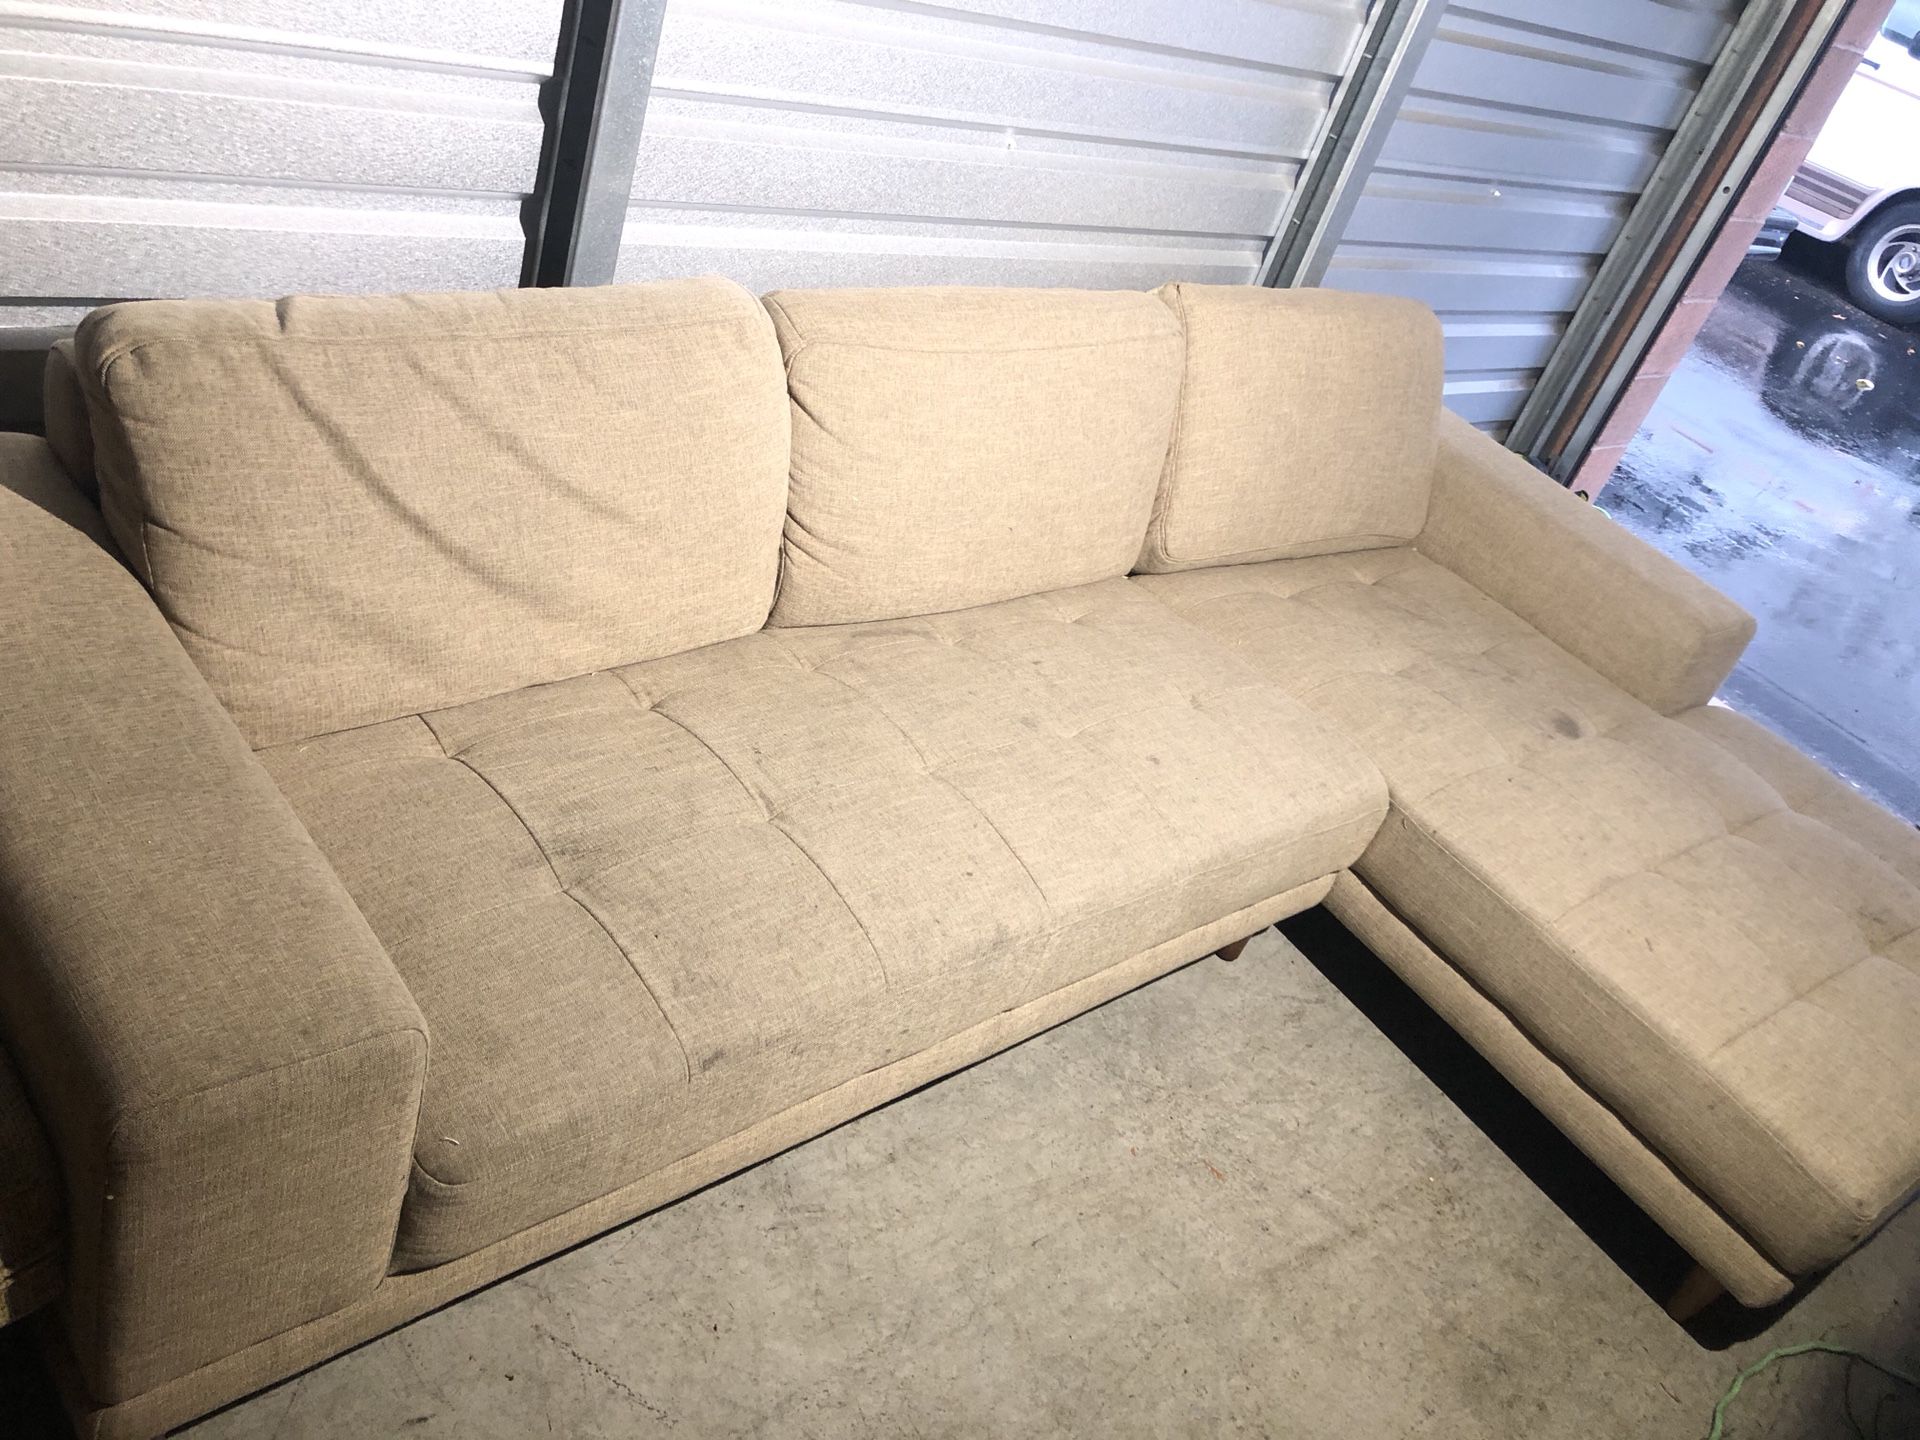 Excellent sectional in very nice condition